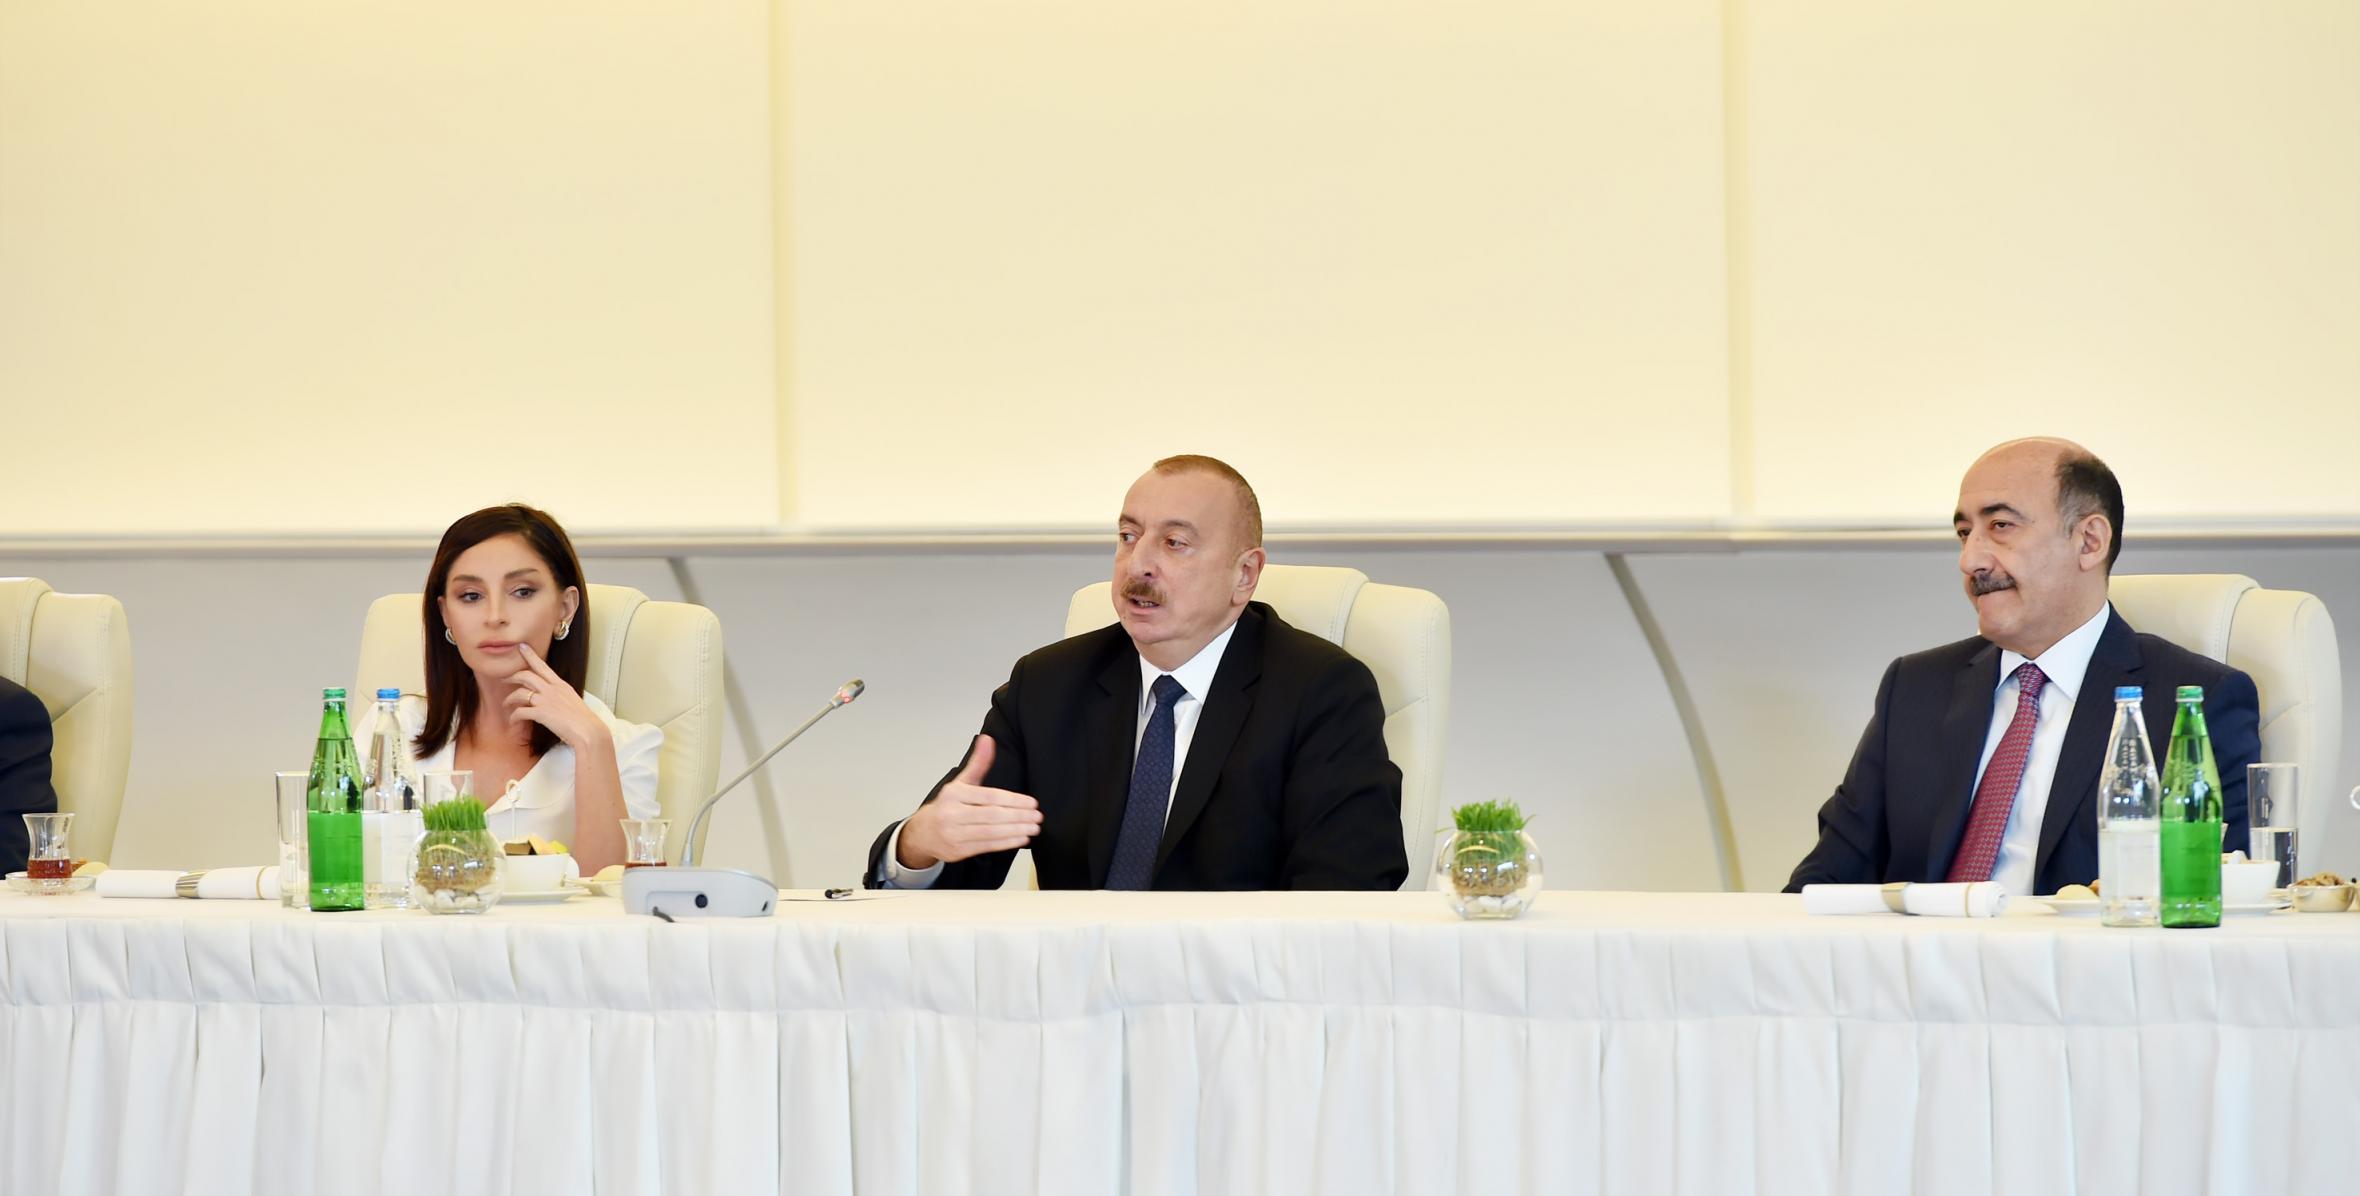 Closing speech by Ilham Aliyev at the meeting with a group of culture and art figures